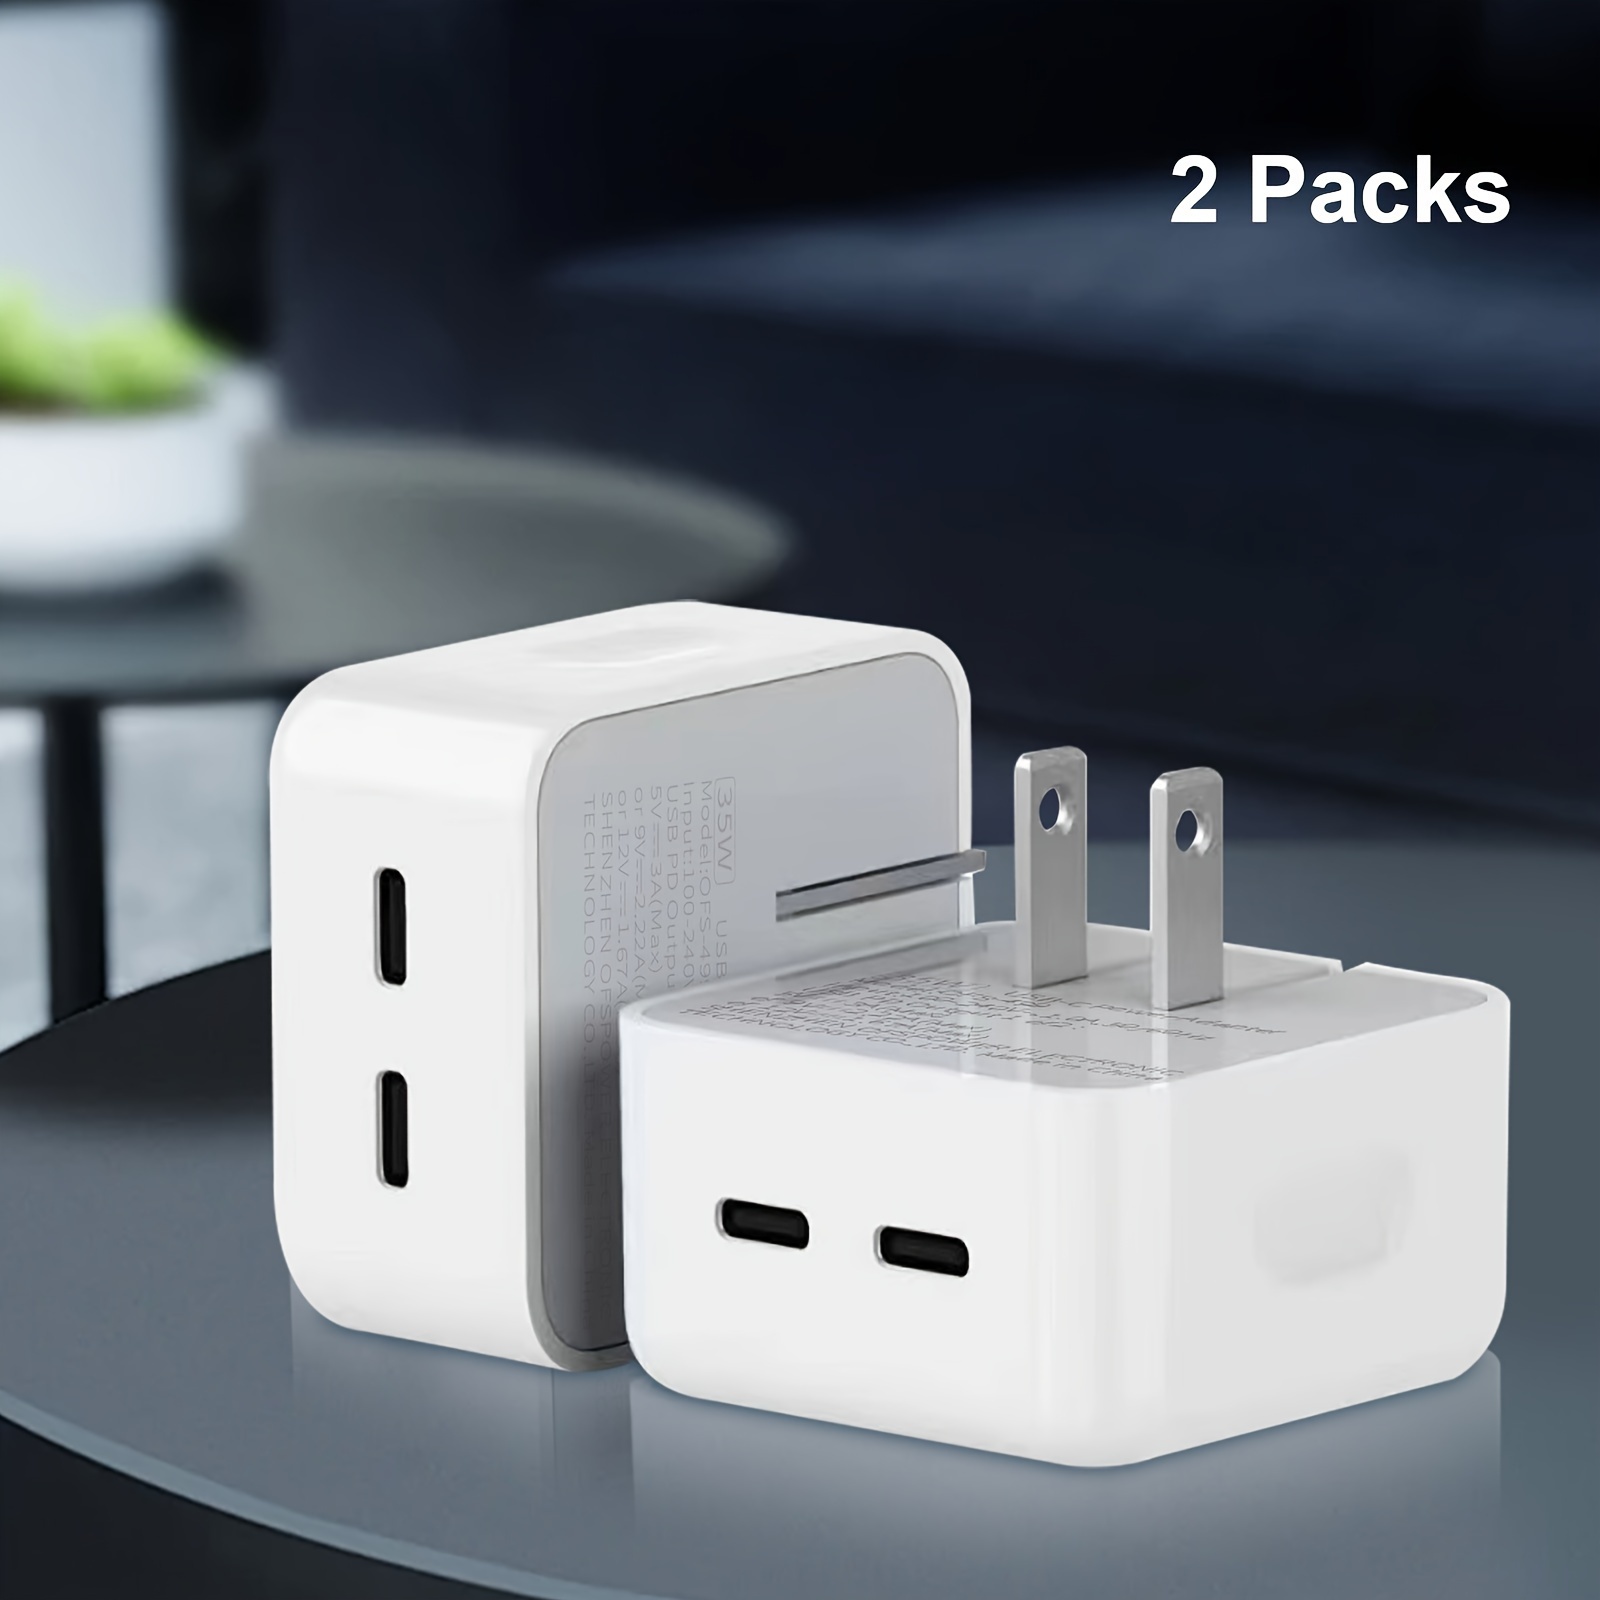 

Dual Usb-c Port Compact Power Adapter Foldable 2-pack Usb Type C Plug Fast Wall Charger Block With A C To C Cable For /14 Pro/iphone13 12 11, Ipad,